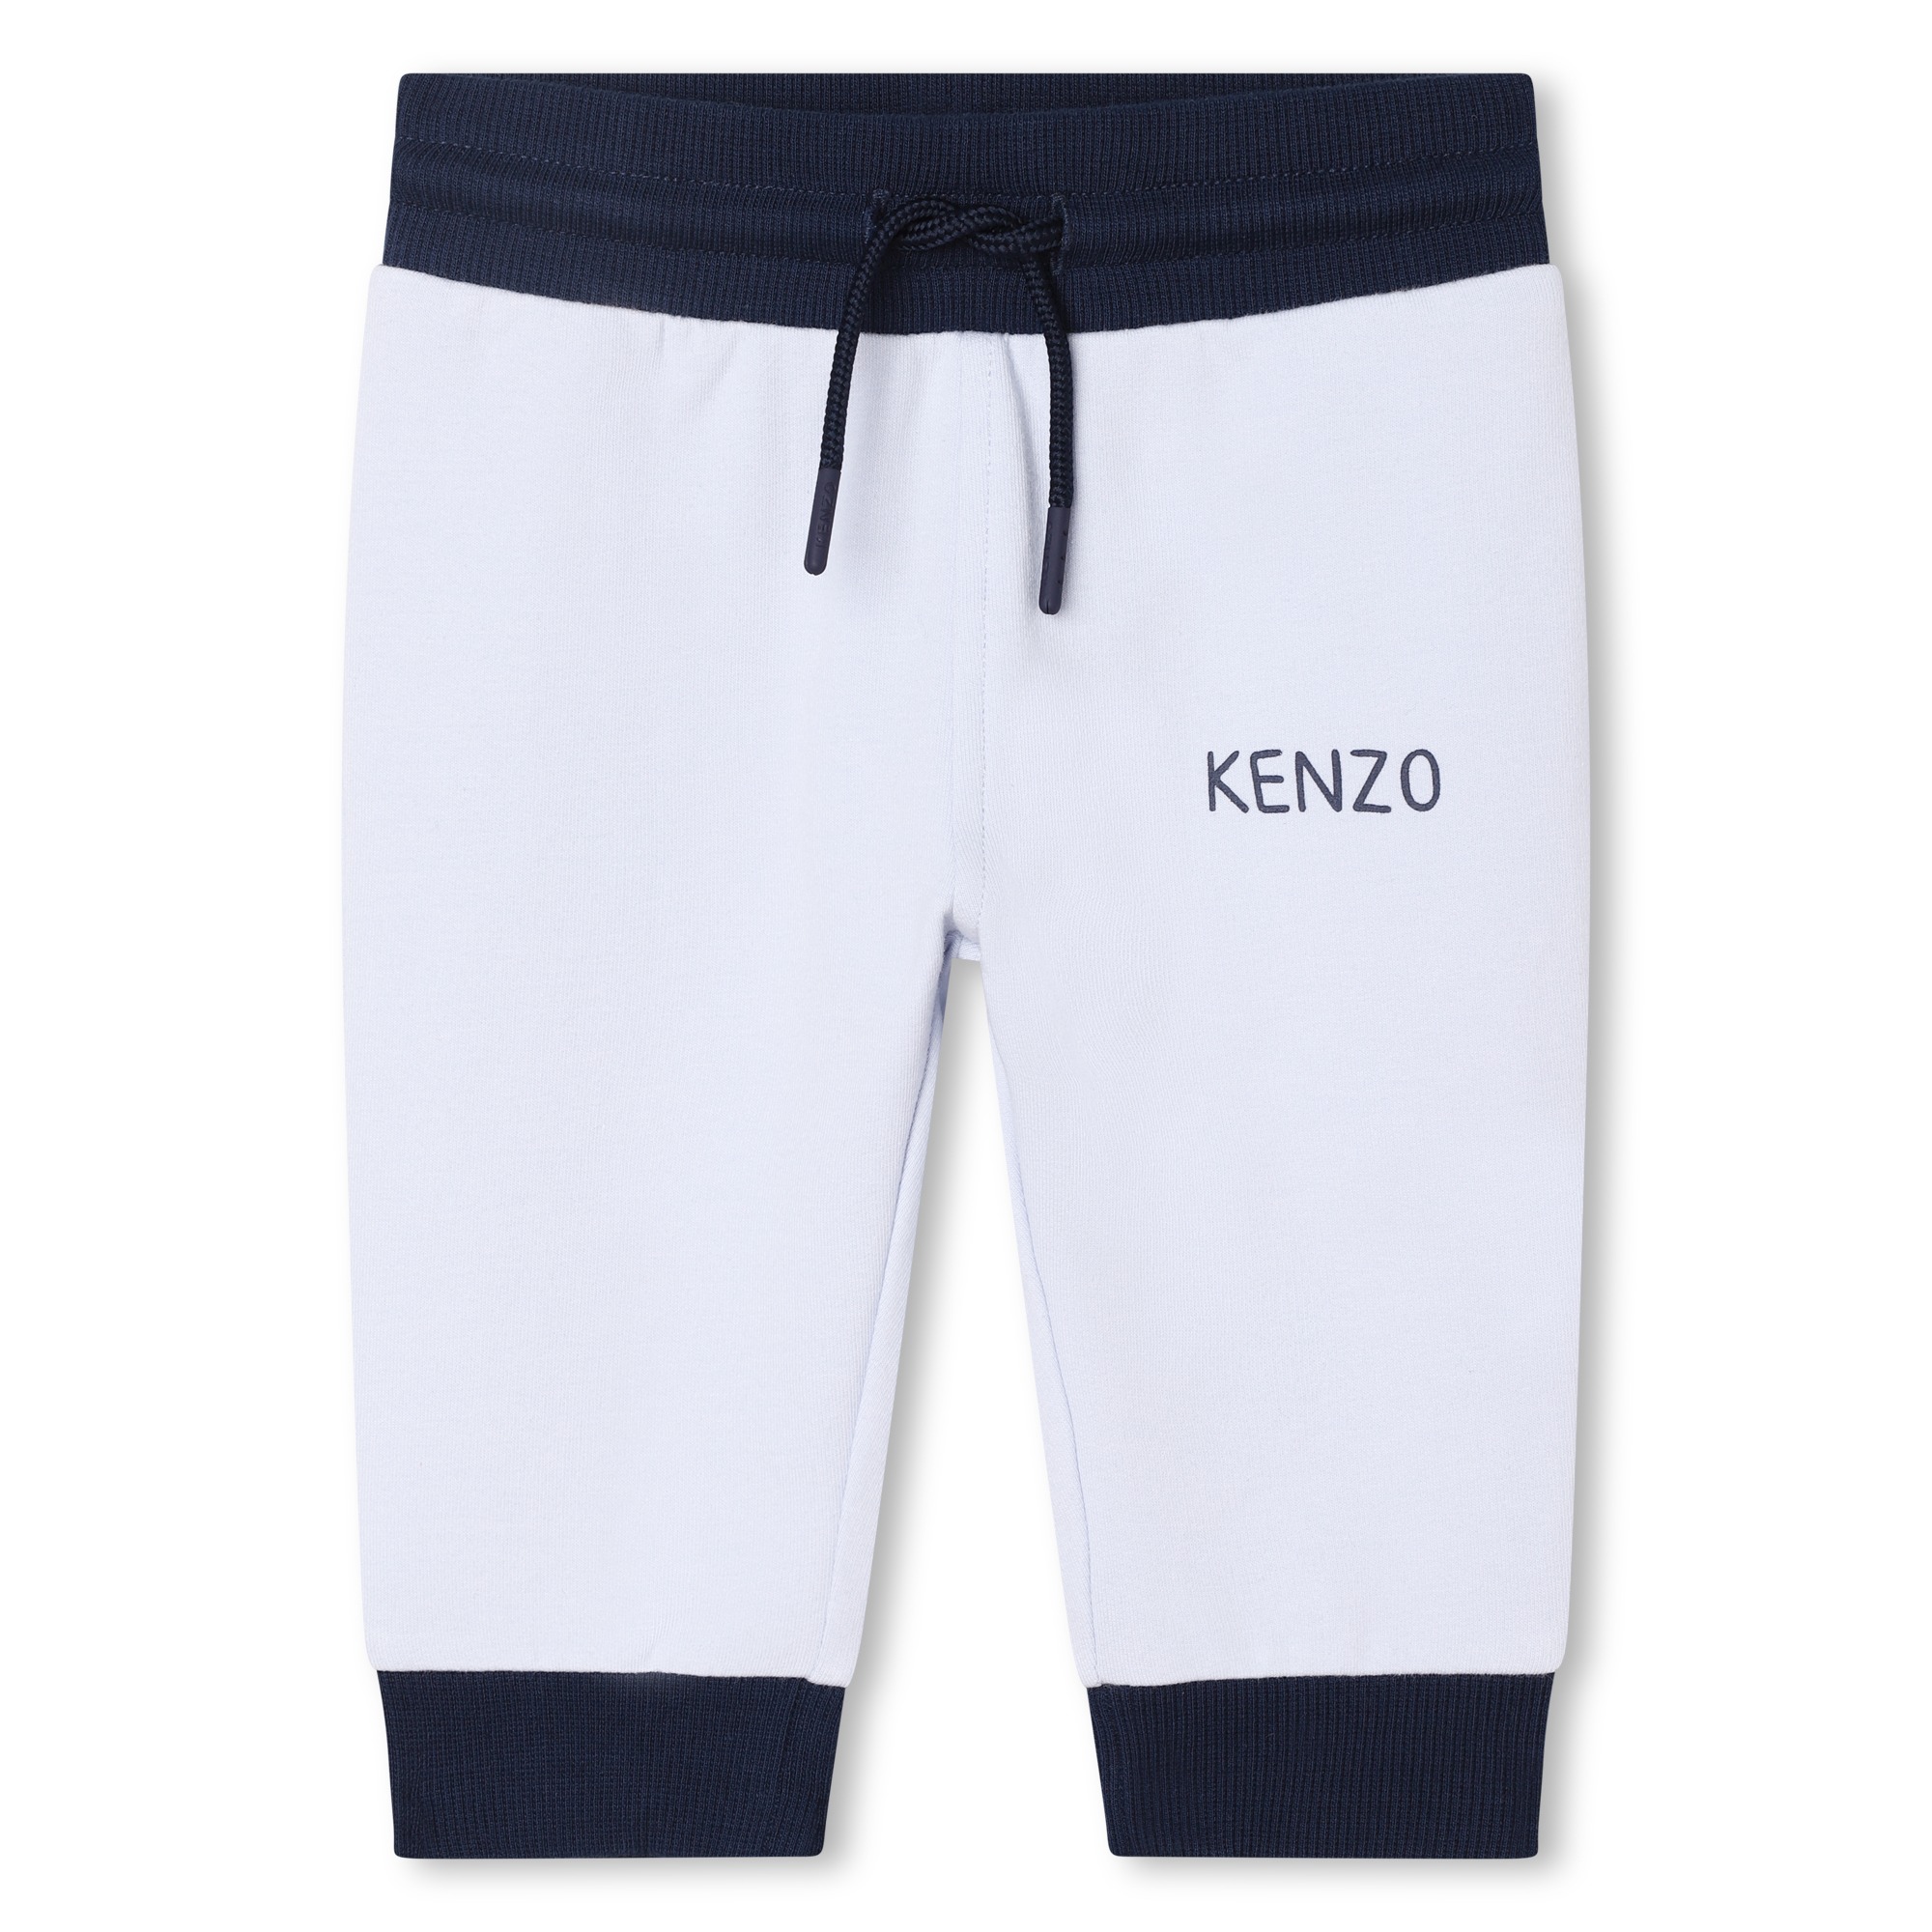 T-shirt and trousers outfit KENZO KIDS for BOY